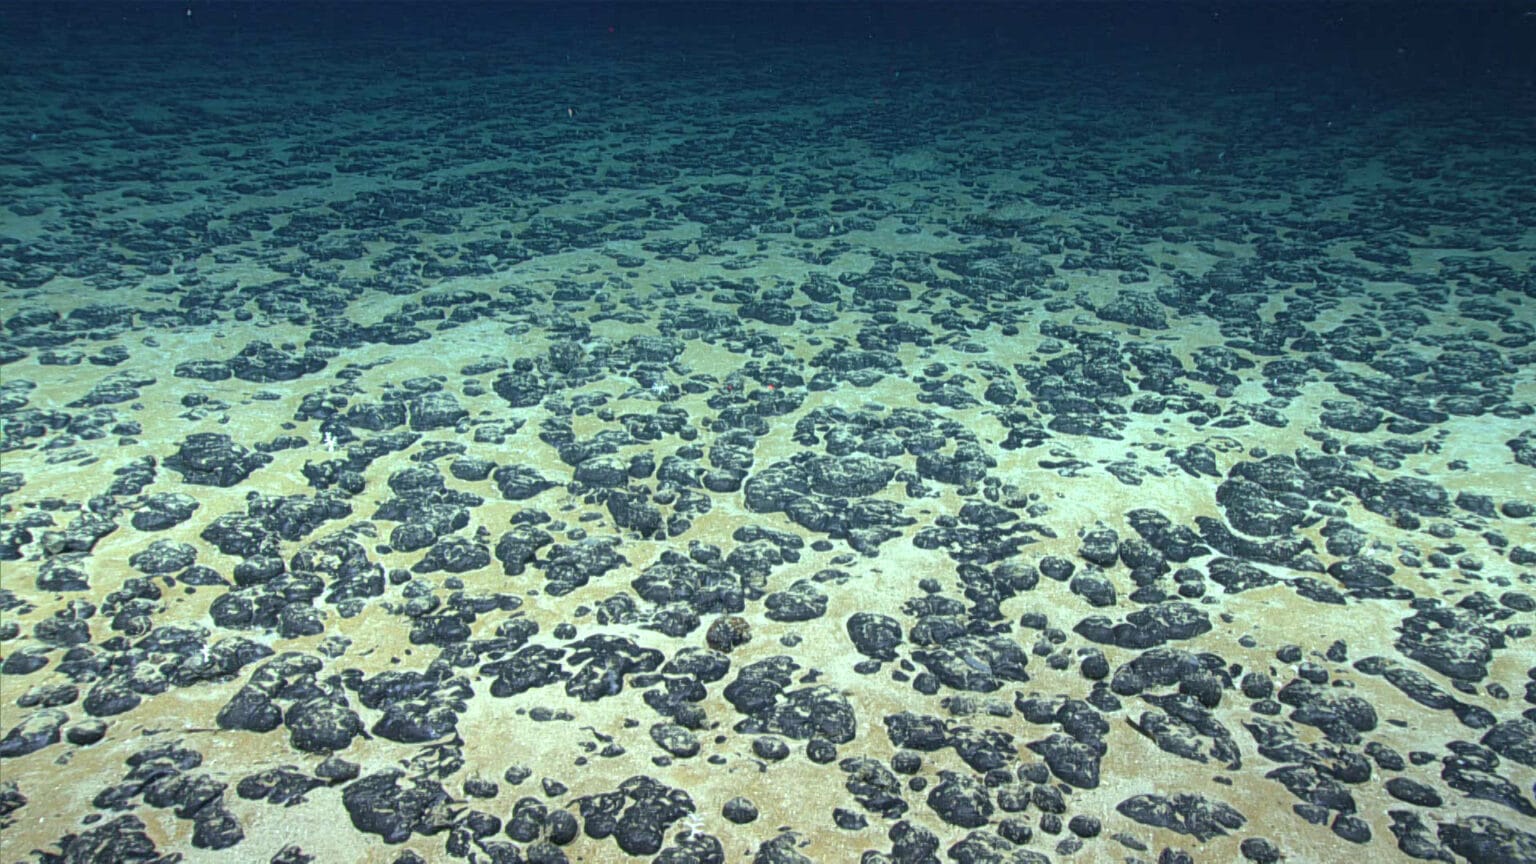 The deep-sea floor covered in small rounded grayish rocks on a sandy bottom